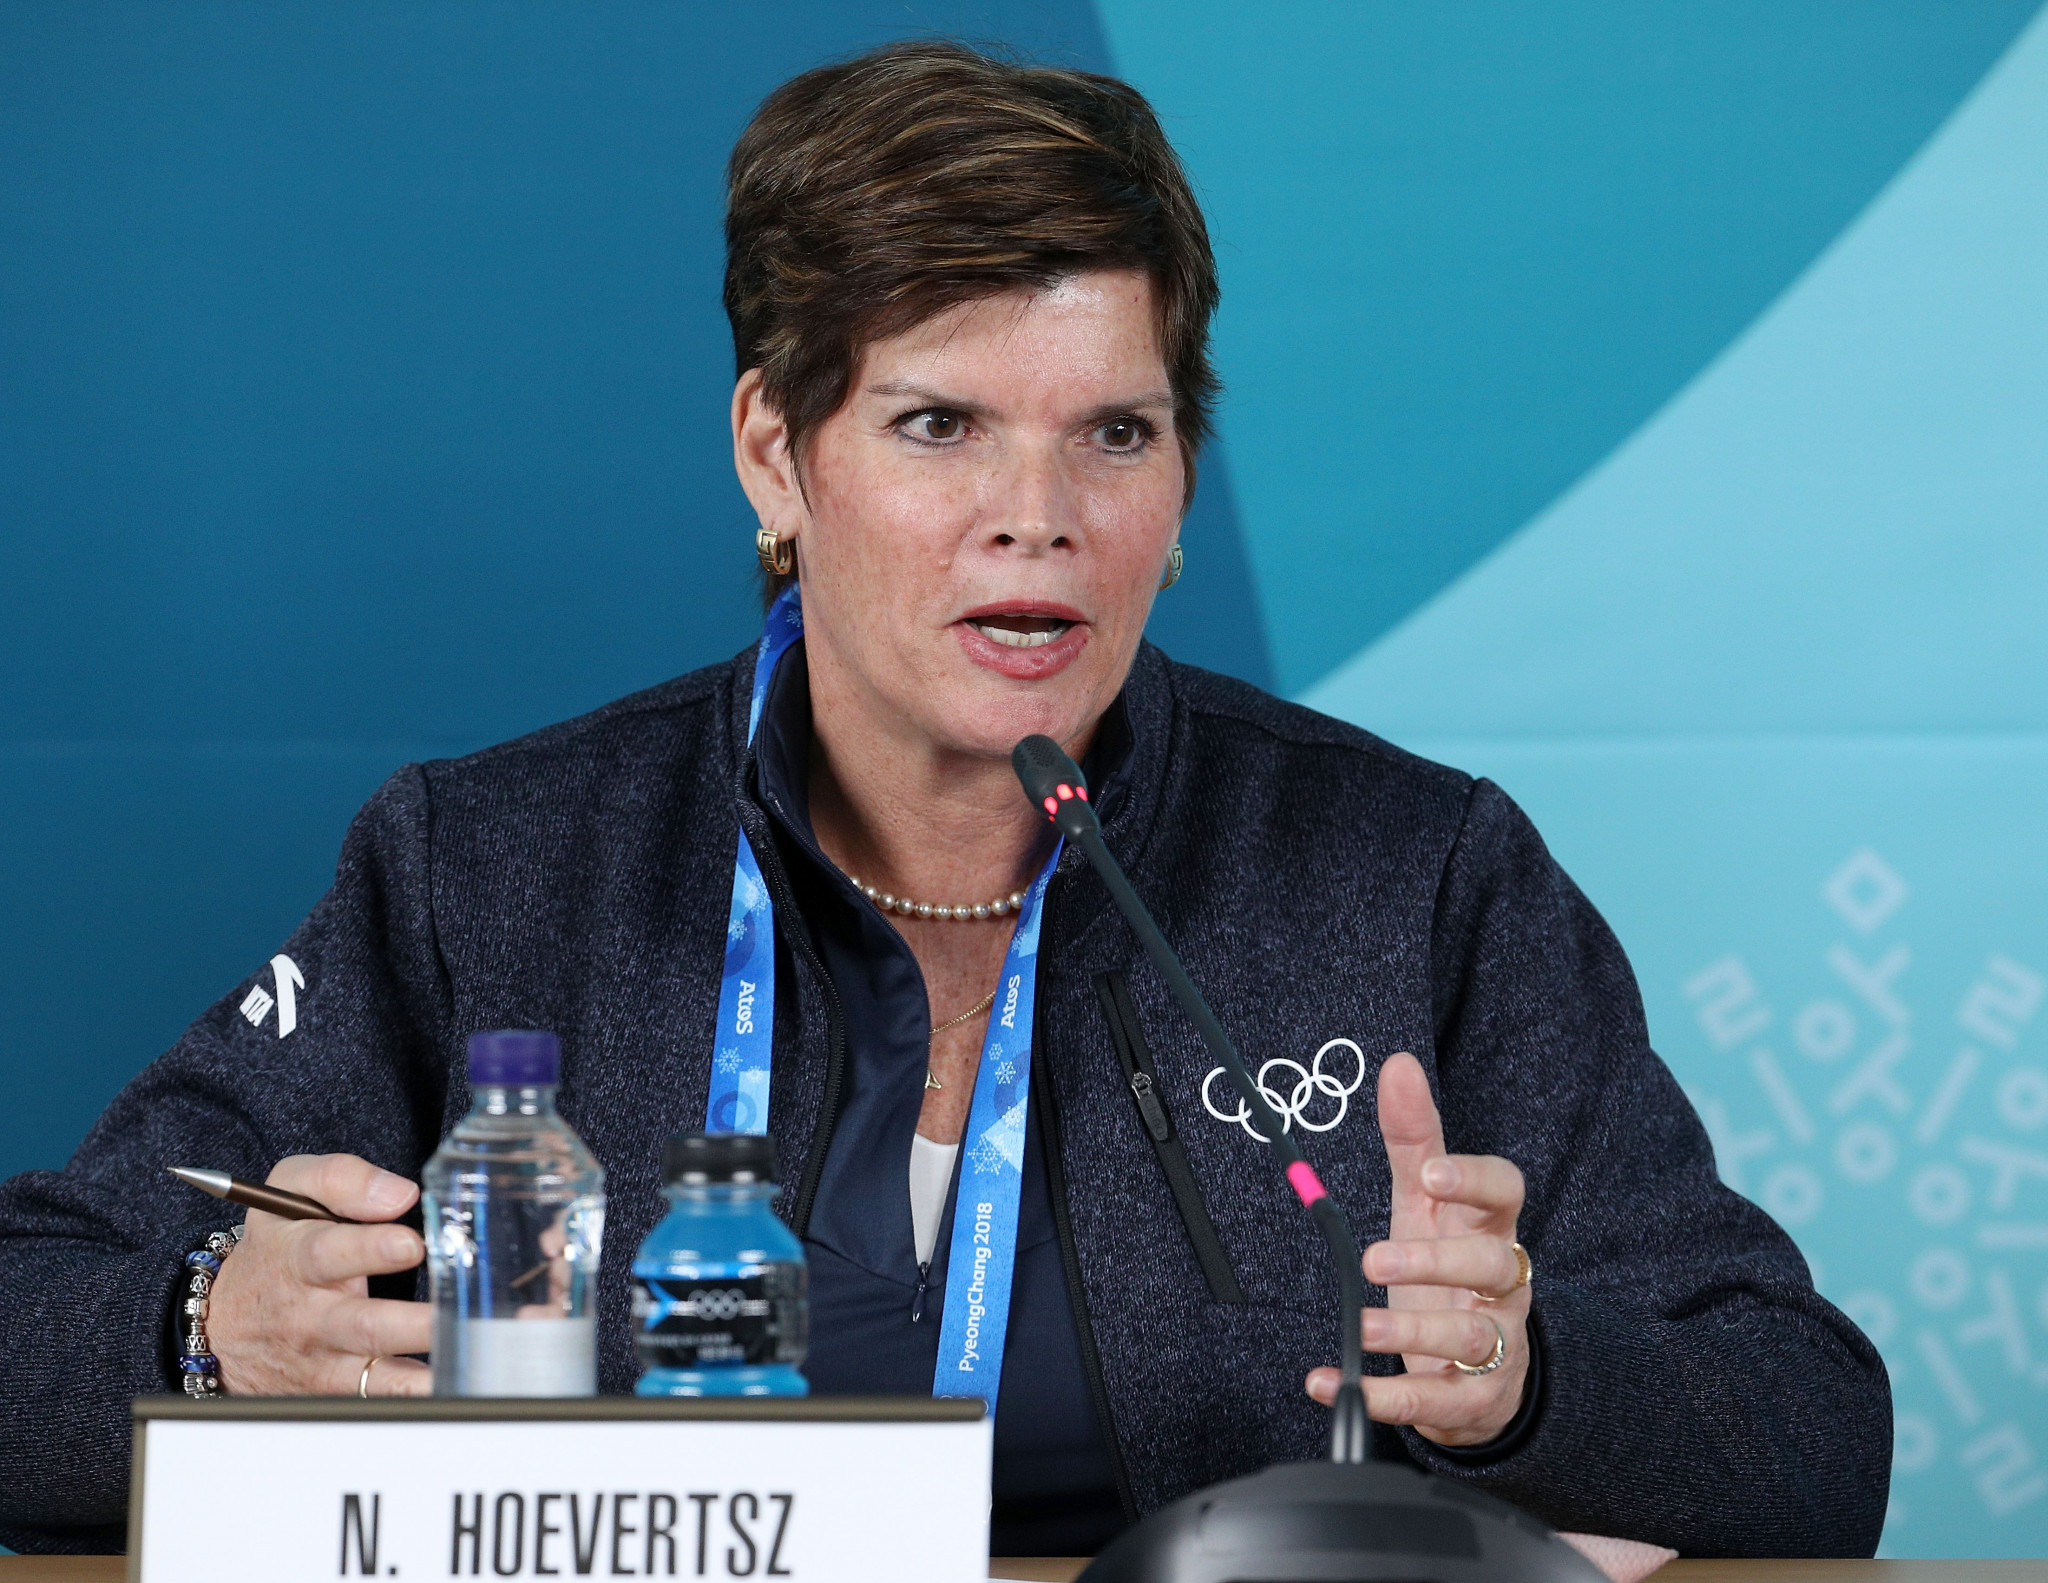 Nicole Hoevertsz of Aruba is currently an IOC vice-president and could be a contender to succeed Thomas Bach as President when his term finishes in 2025 ©Getty Images